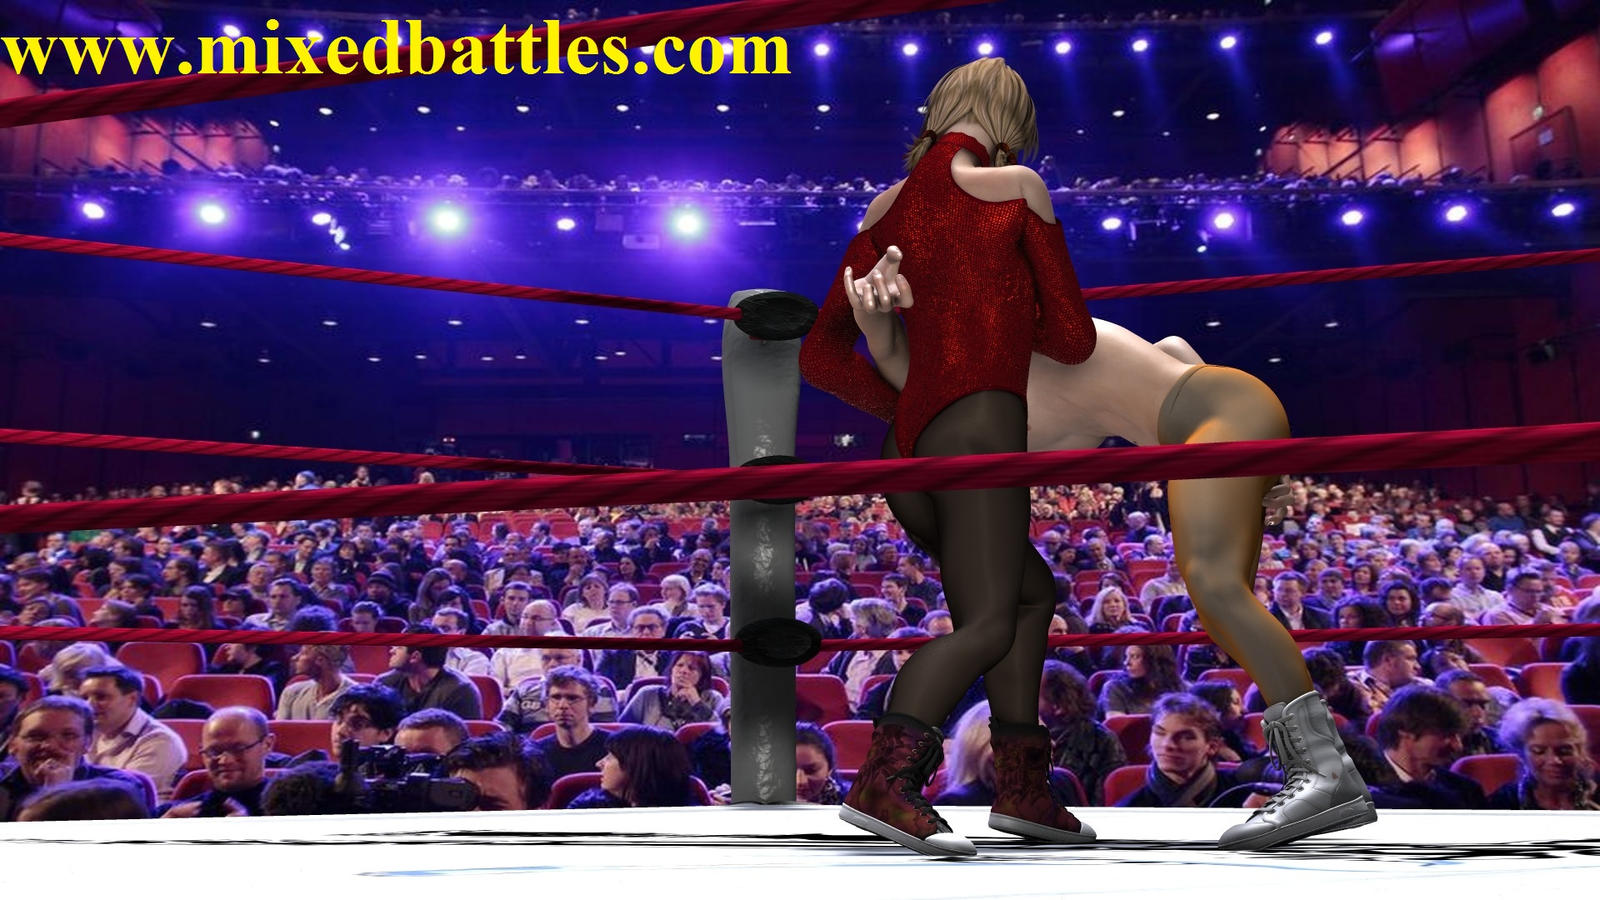 FightingFemdom 3D Mixed Fighting Pictures Page 10 Male Vs Female